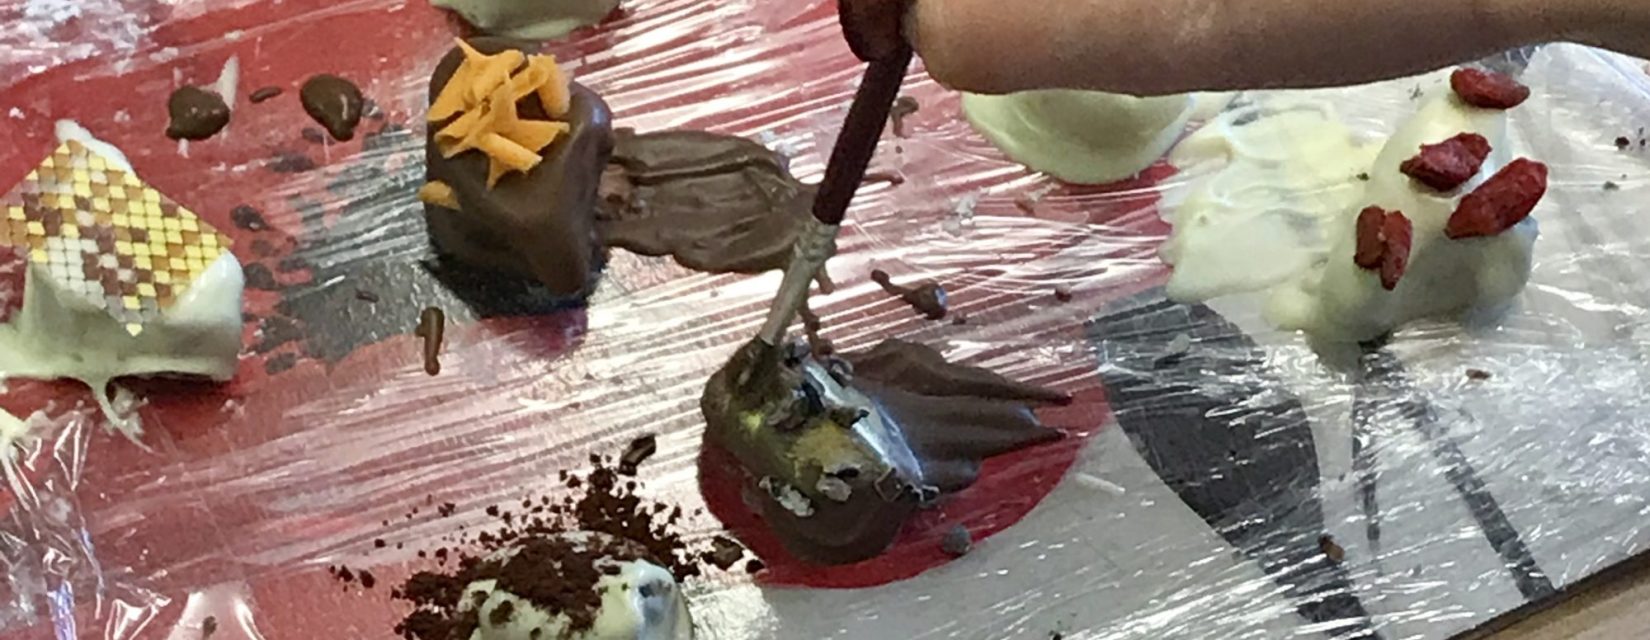 Chocolate creations on a slab of cling film